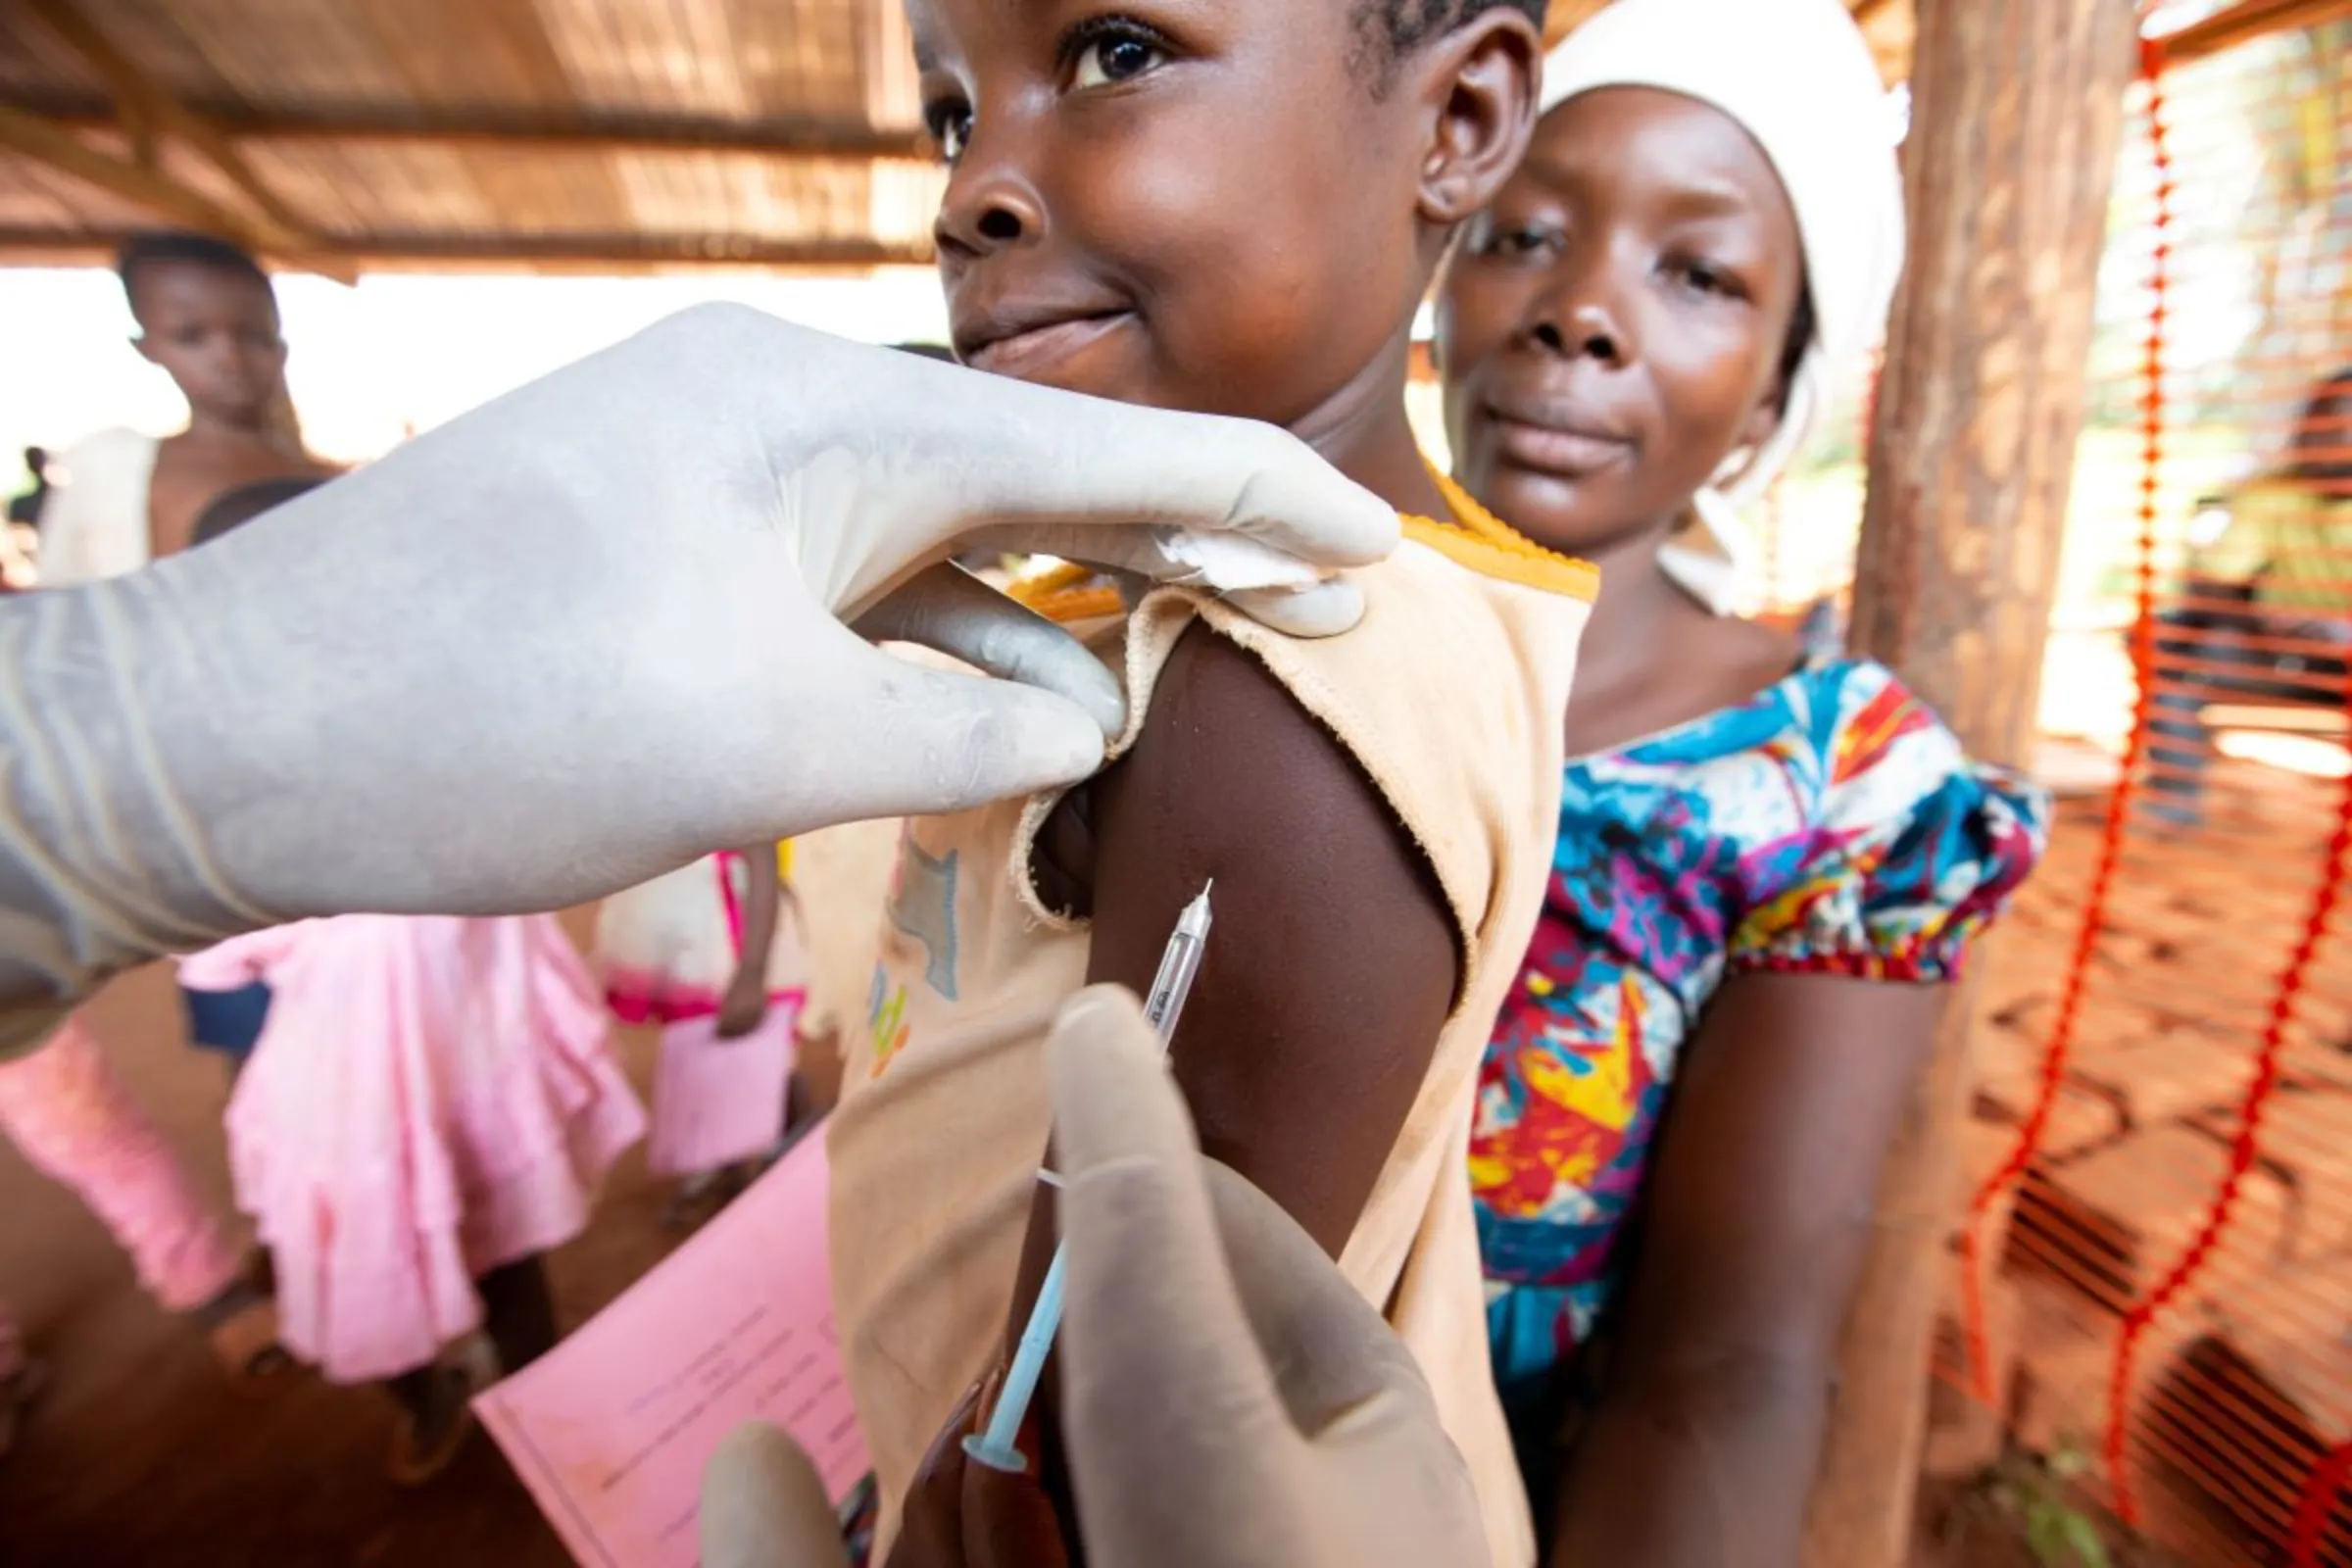 A child is given a measles vaccination during an emergency campaign run by Doctors Without Borders (MSF) in Likasa, Mongala province in northern Democratic Republic of Congo March 3, 2020. REUTERS/Hereward Holland